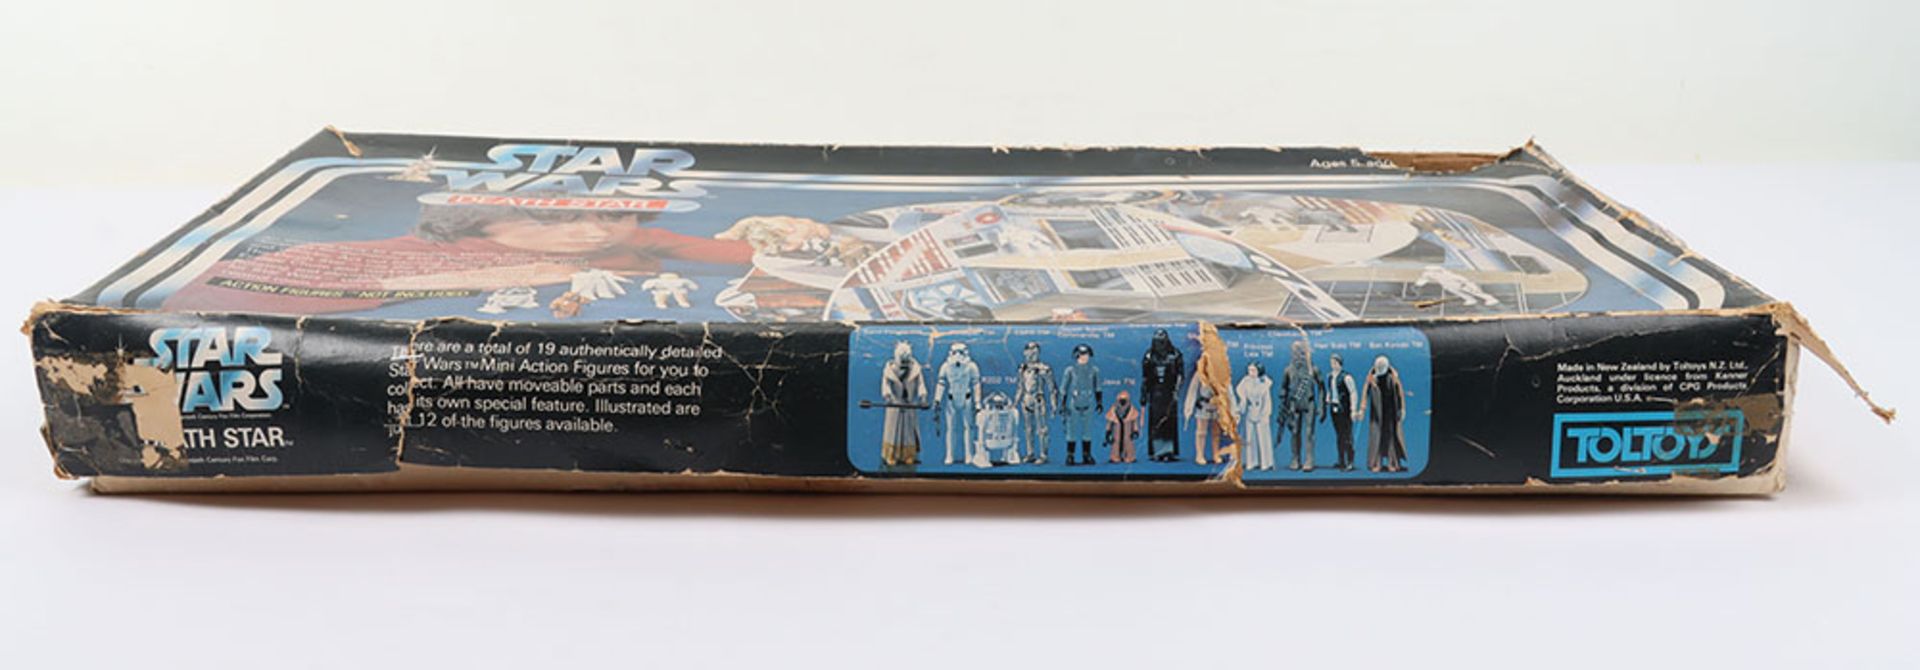 Scarce Toltoys New Zealand Vintage Star Wars Death Star Play Centre - Image 9 of 14